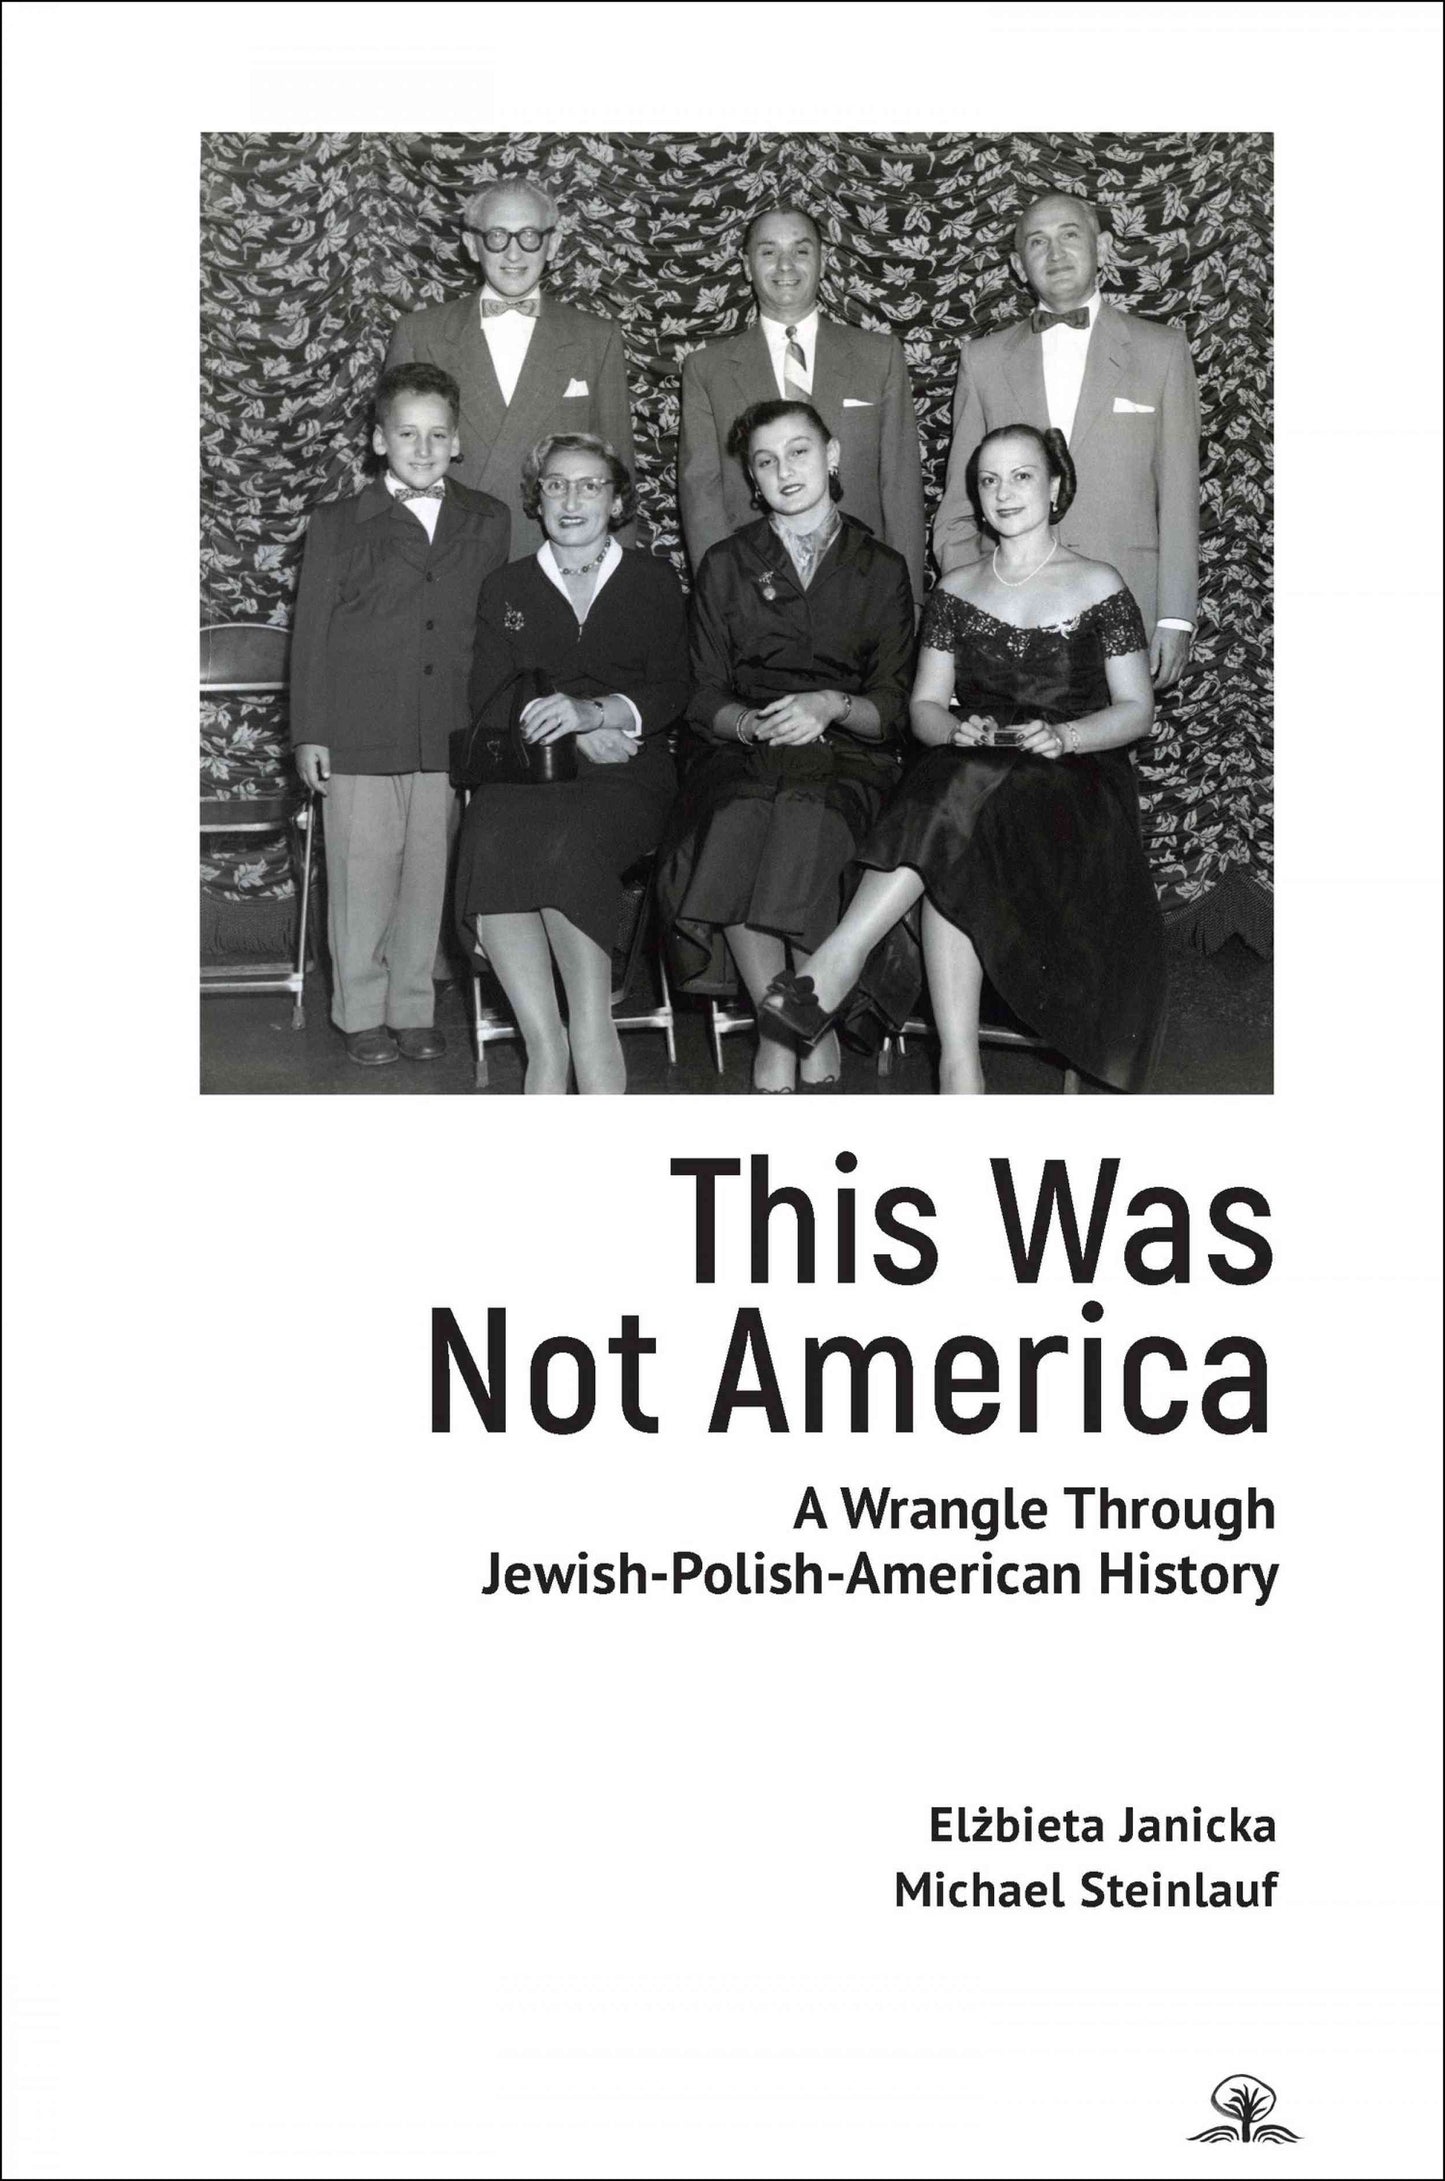 This Was Not America: A Wrangle Through Jewish-Polish-American History